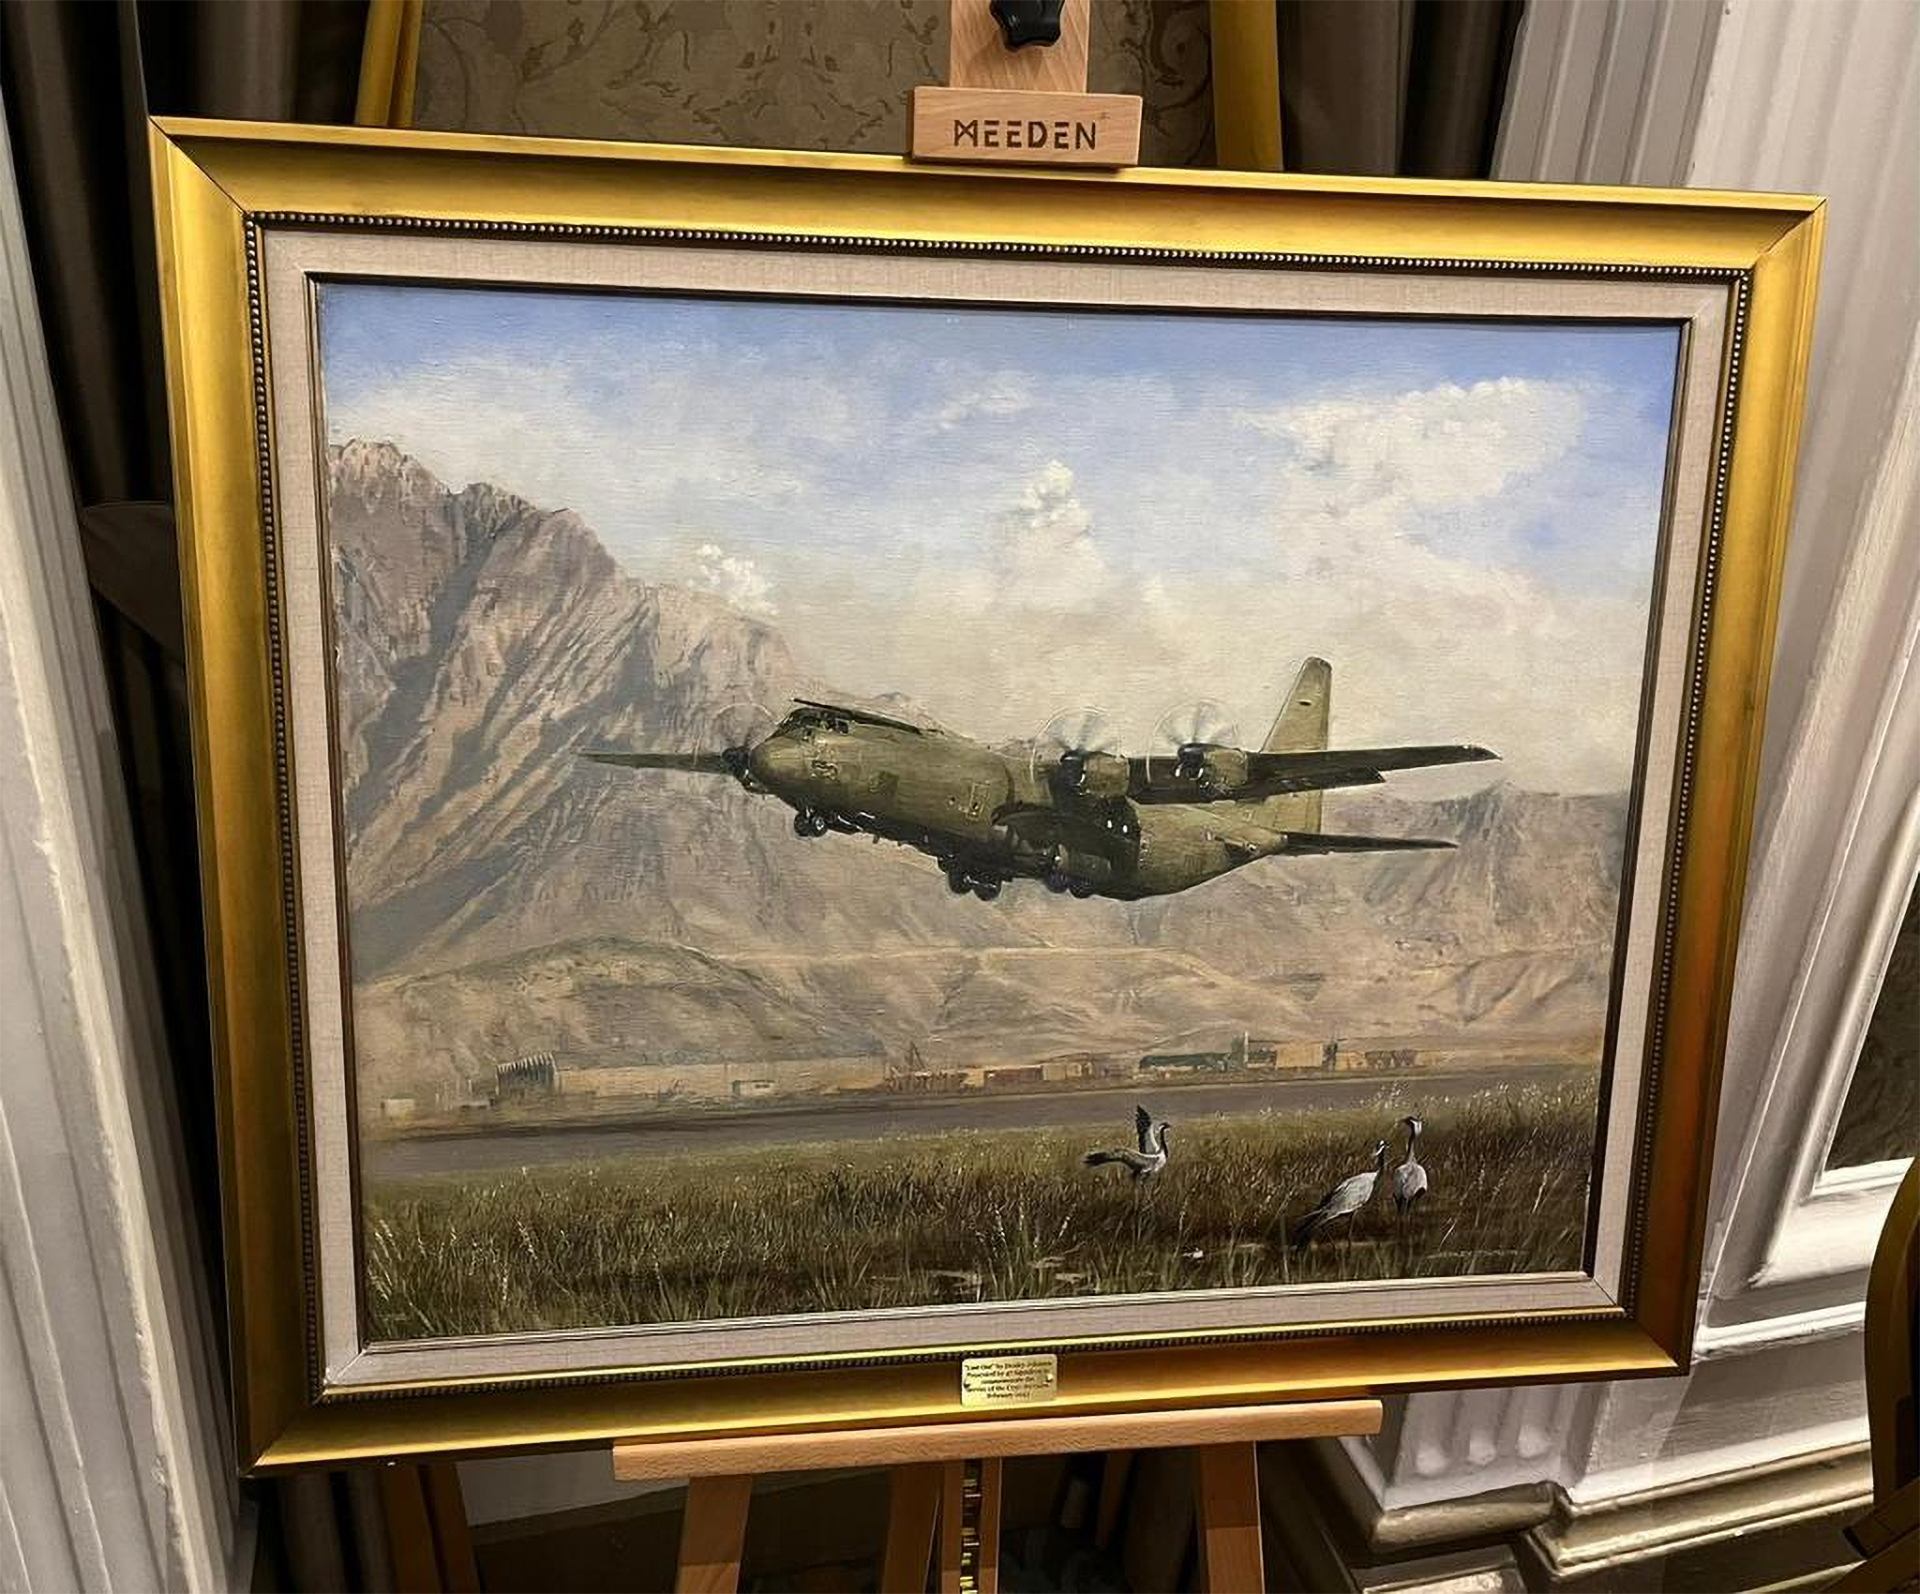 Earlier this month, personnel from Number 47 Squadron headed to the Royal Air Force Club to present the Hercules commemorative painting to its new home.